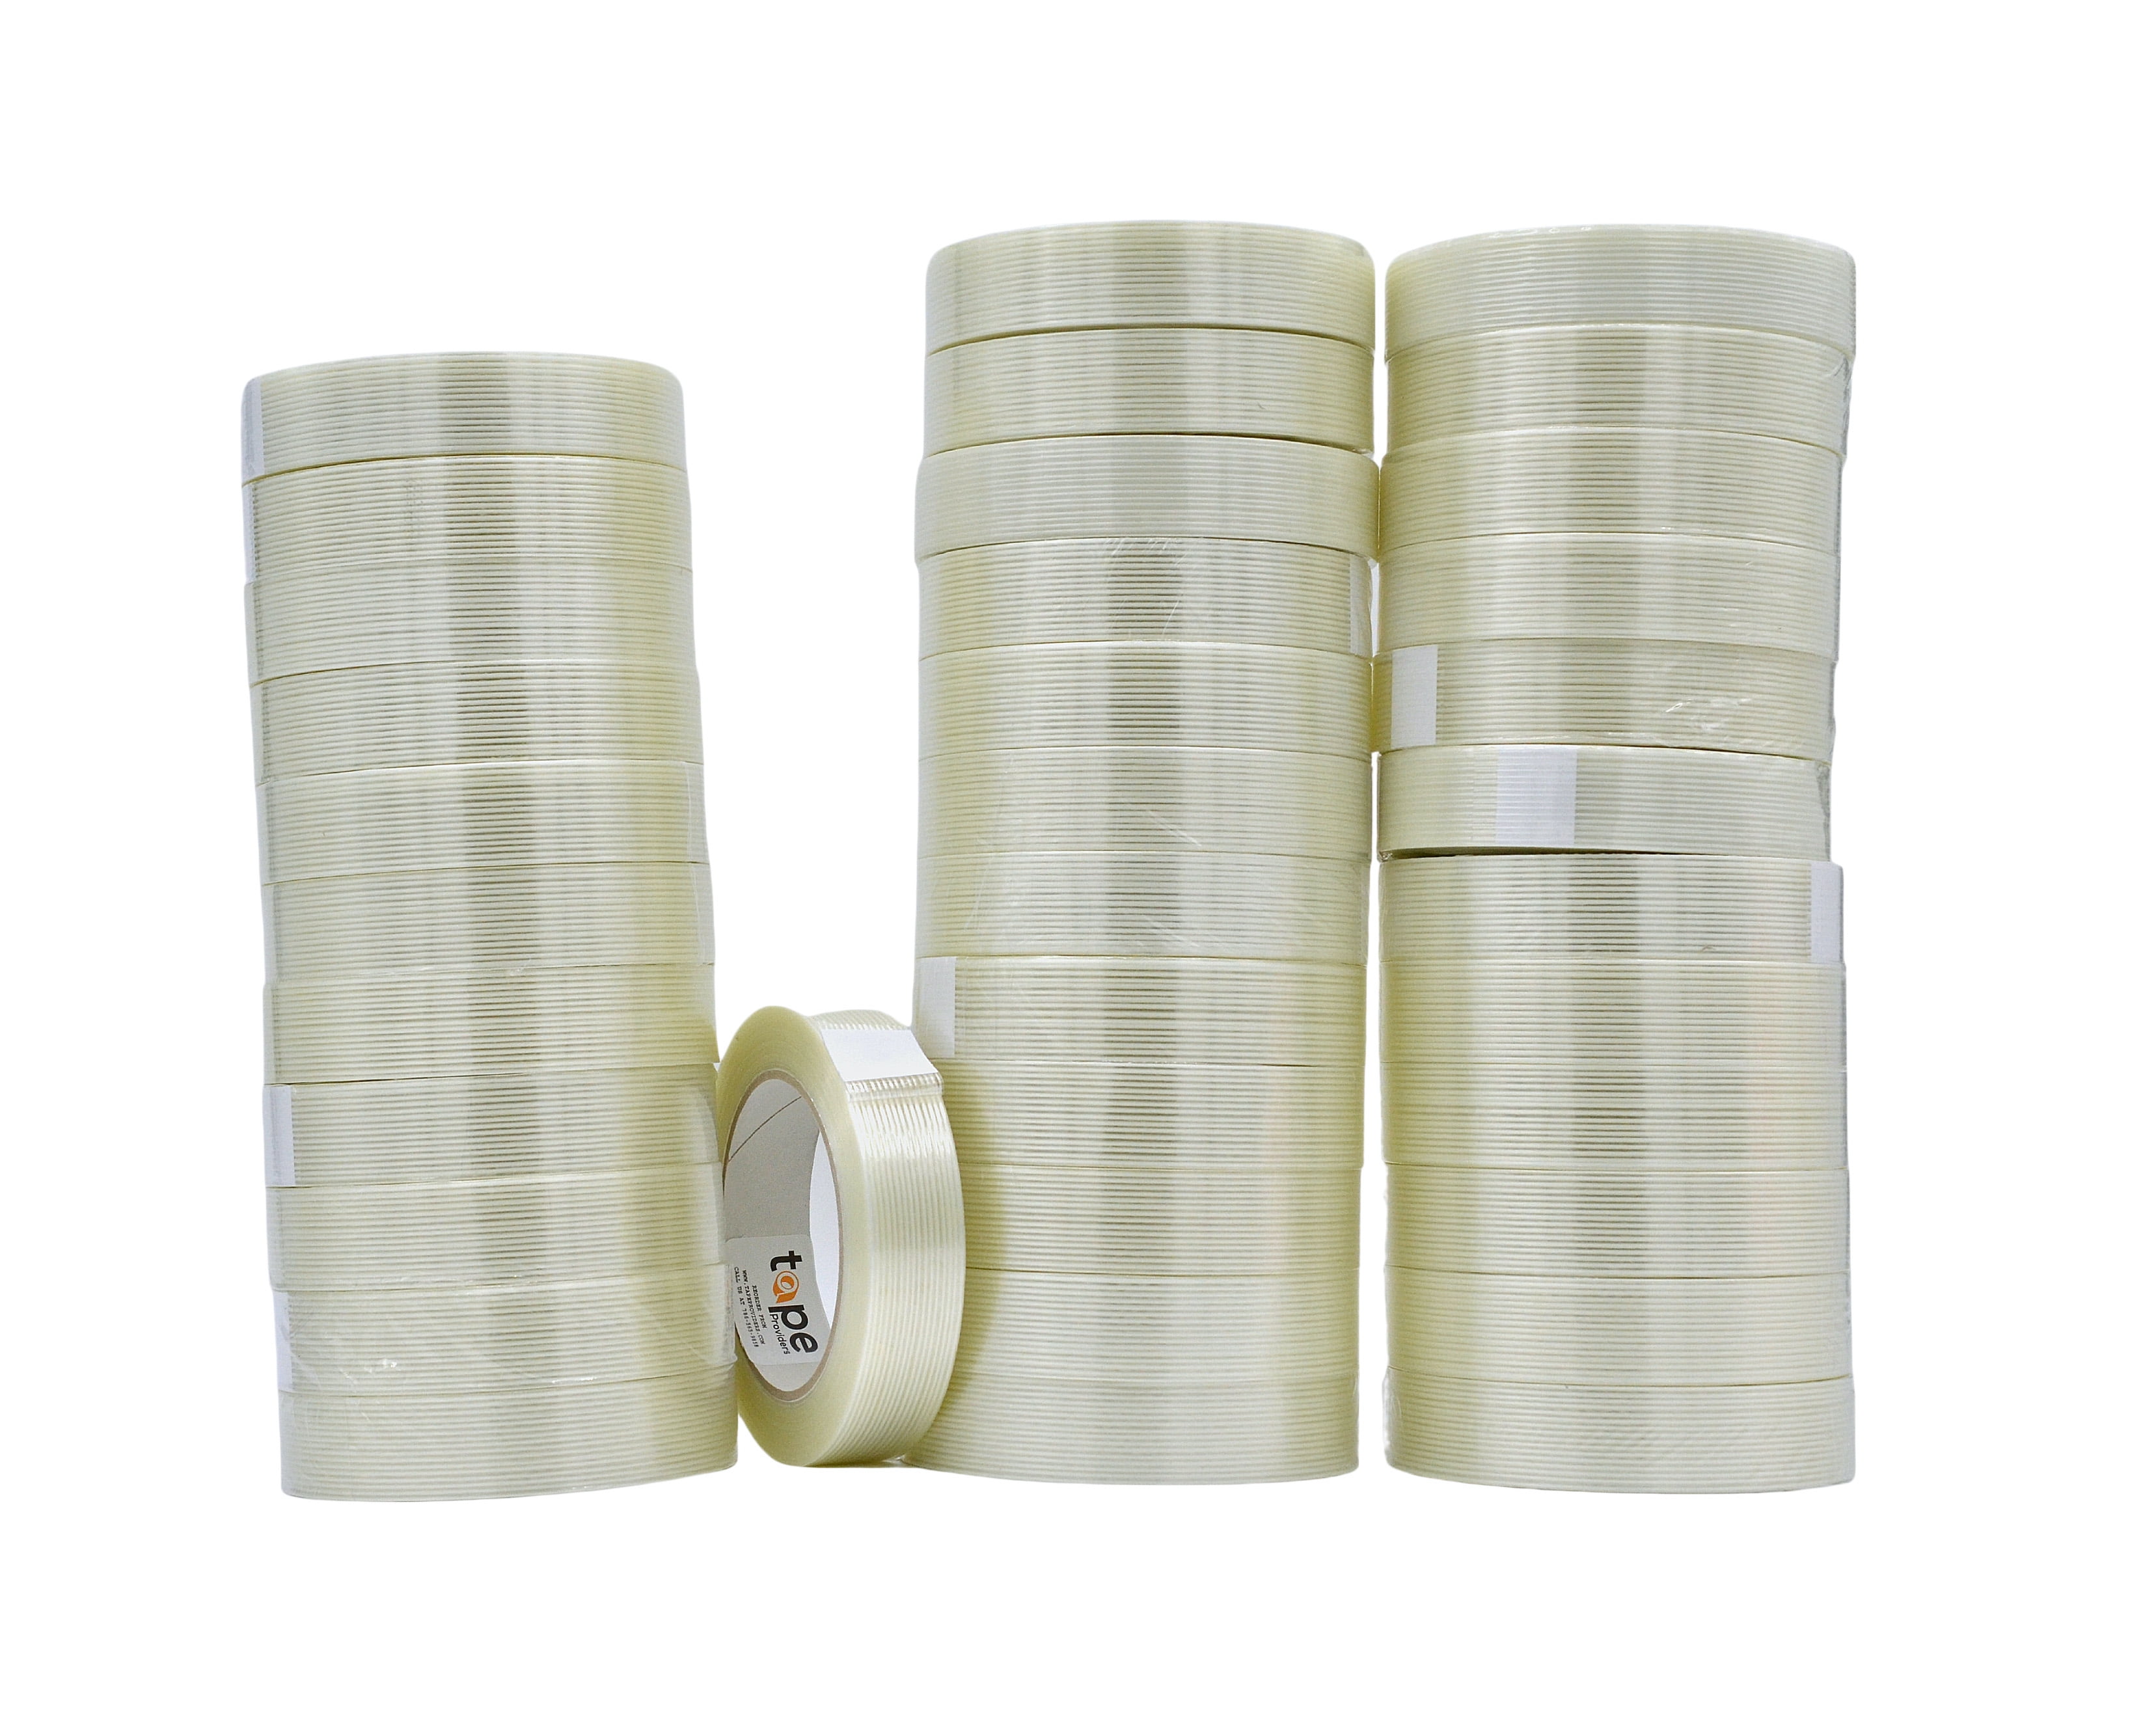 Pack of 1 MAT Commodity Grade Fiberglass Reinforced Filament Strapping Tape 1 in Wide x 60 yds. Filaments Run Lengthwise 